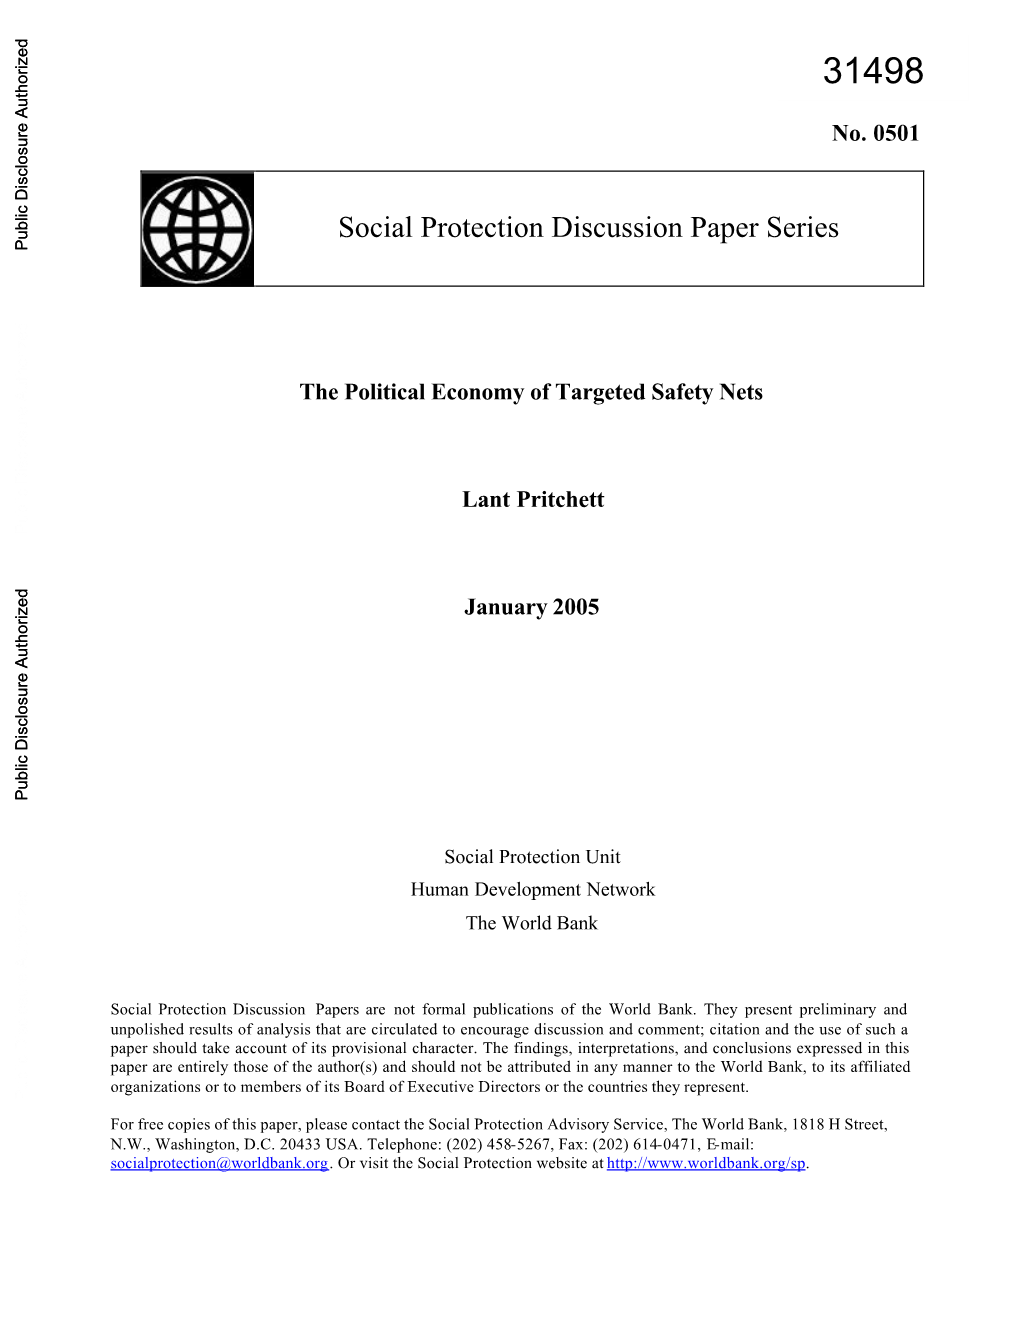 A Lecture on the Political Economy of Targeted Safety Nets